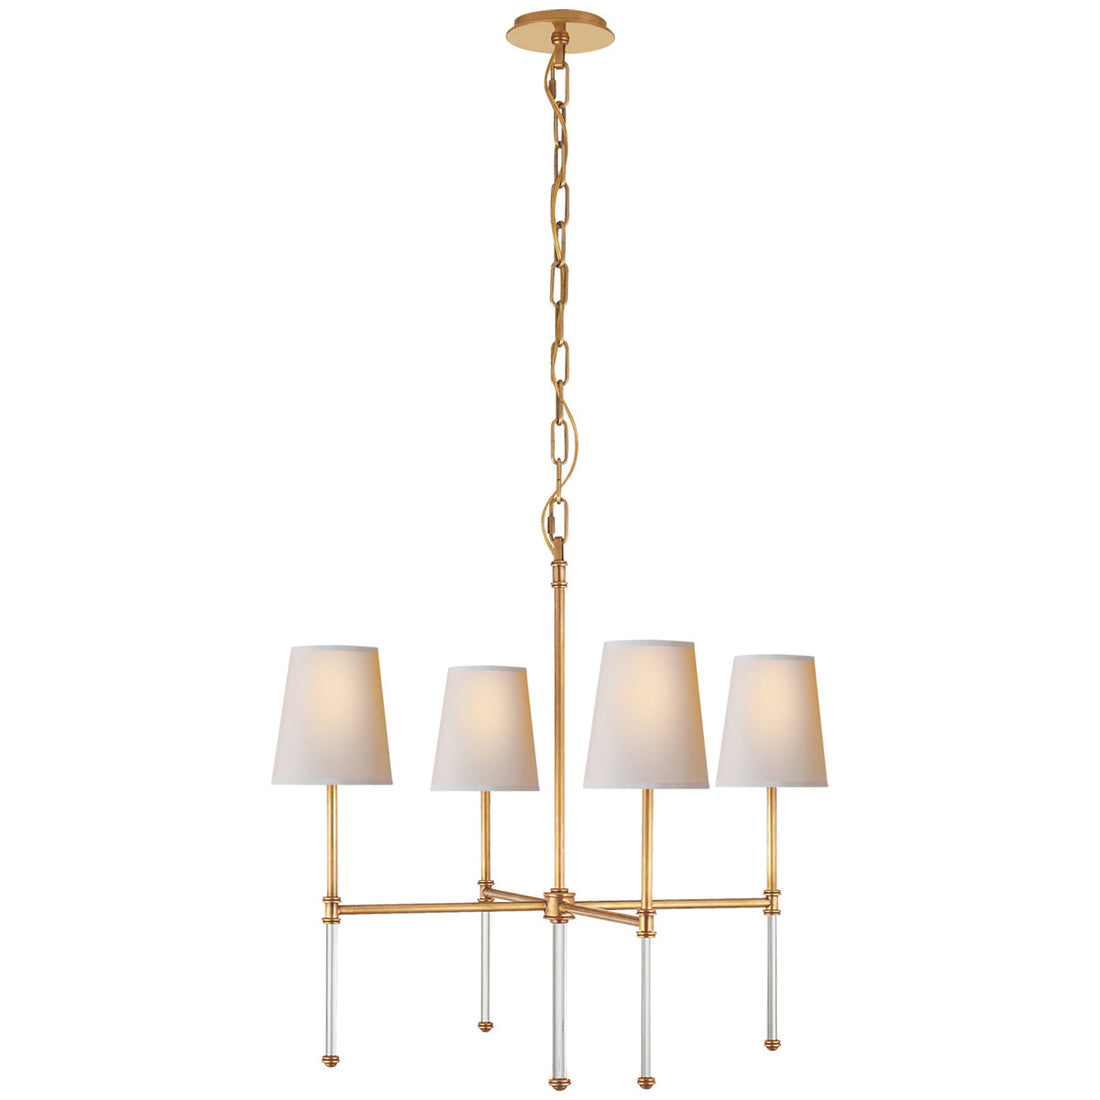 Visual Comfort Camille Small Chandelier